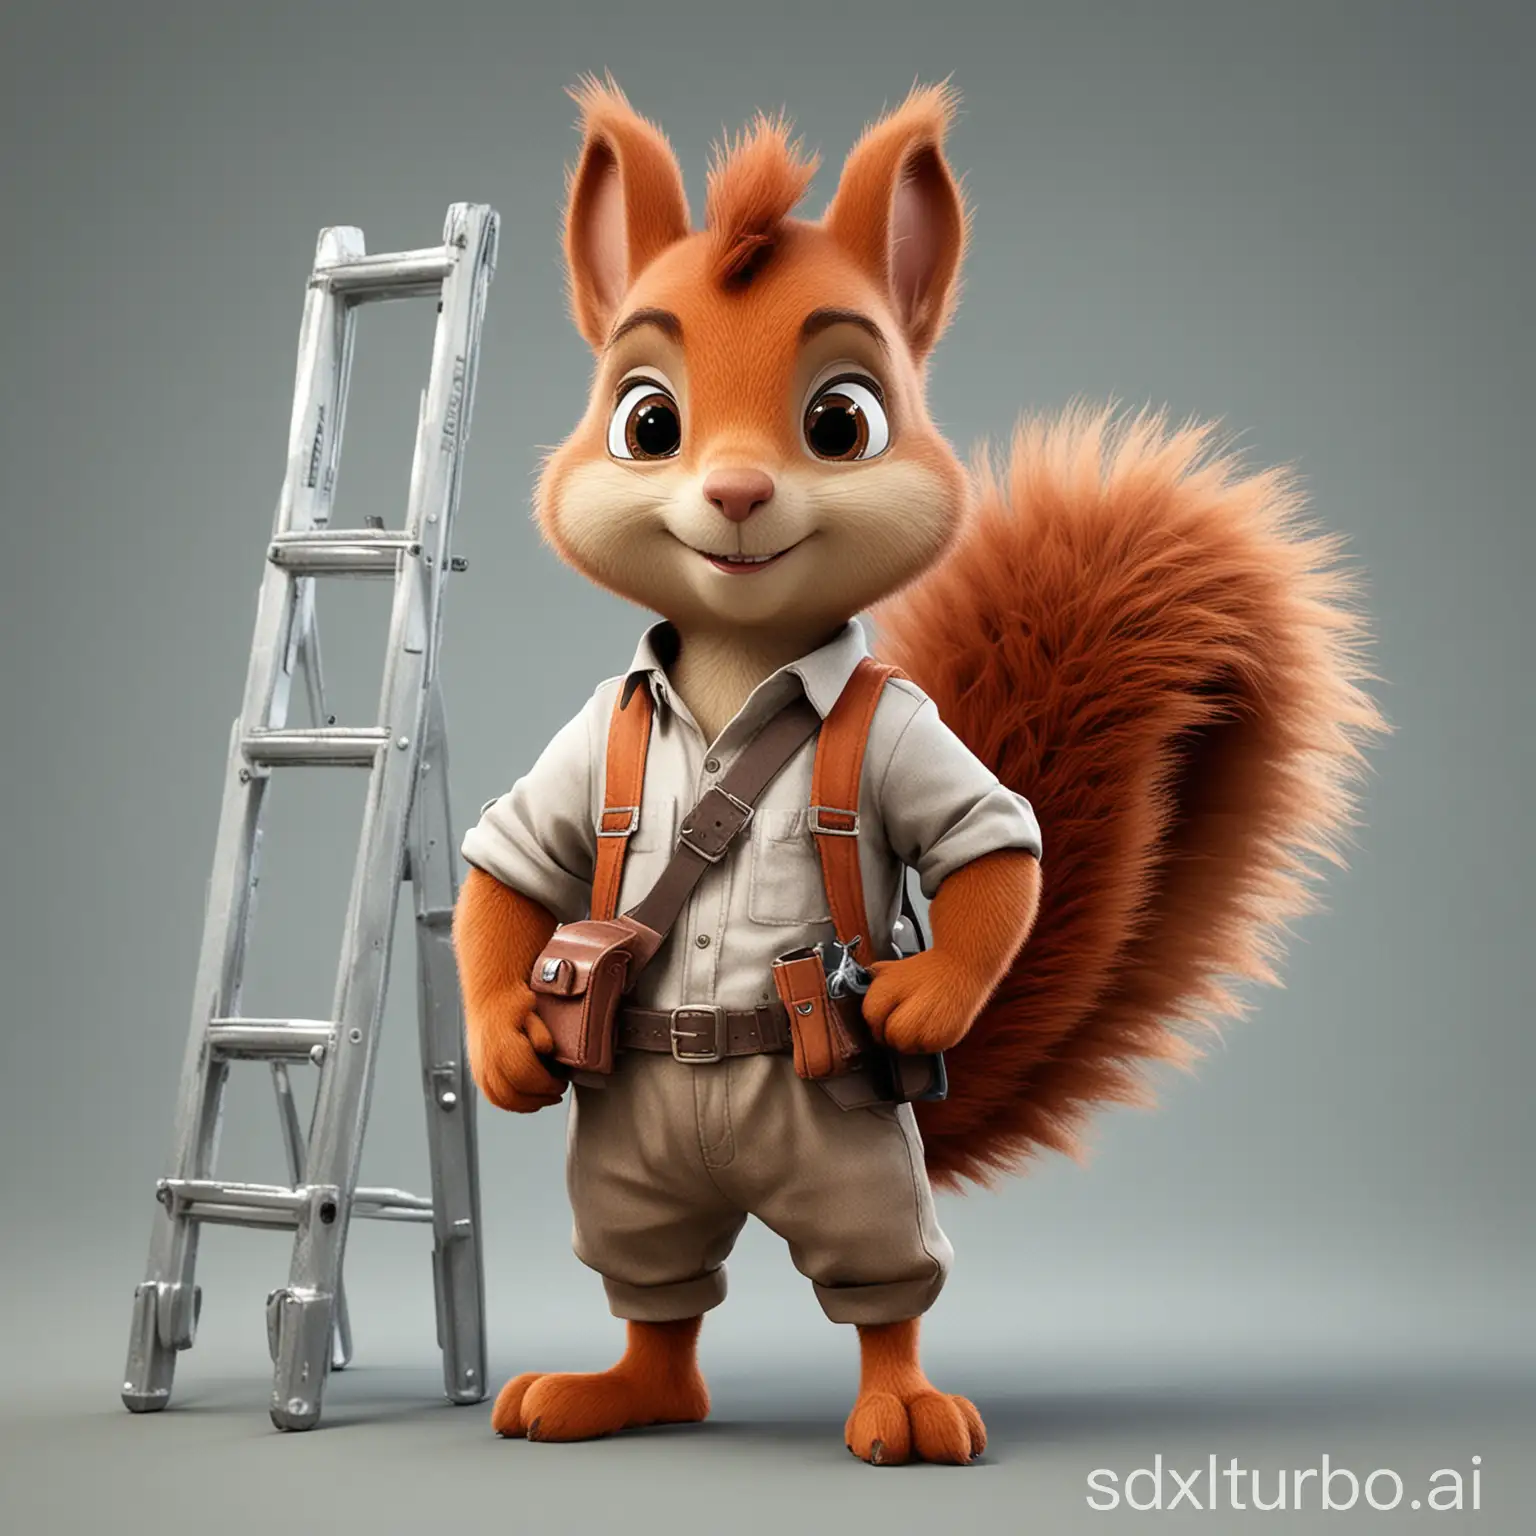 create for me a mascot based on a squirrel that carries scaffoldings, tools or ladders (of your choice). It should resemble the characters of tic and tac from disney but with clothes. The whole body of the character must be visible